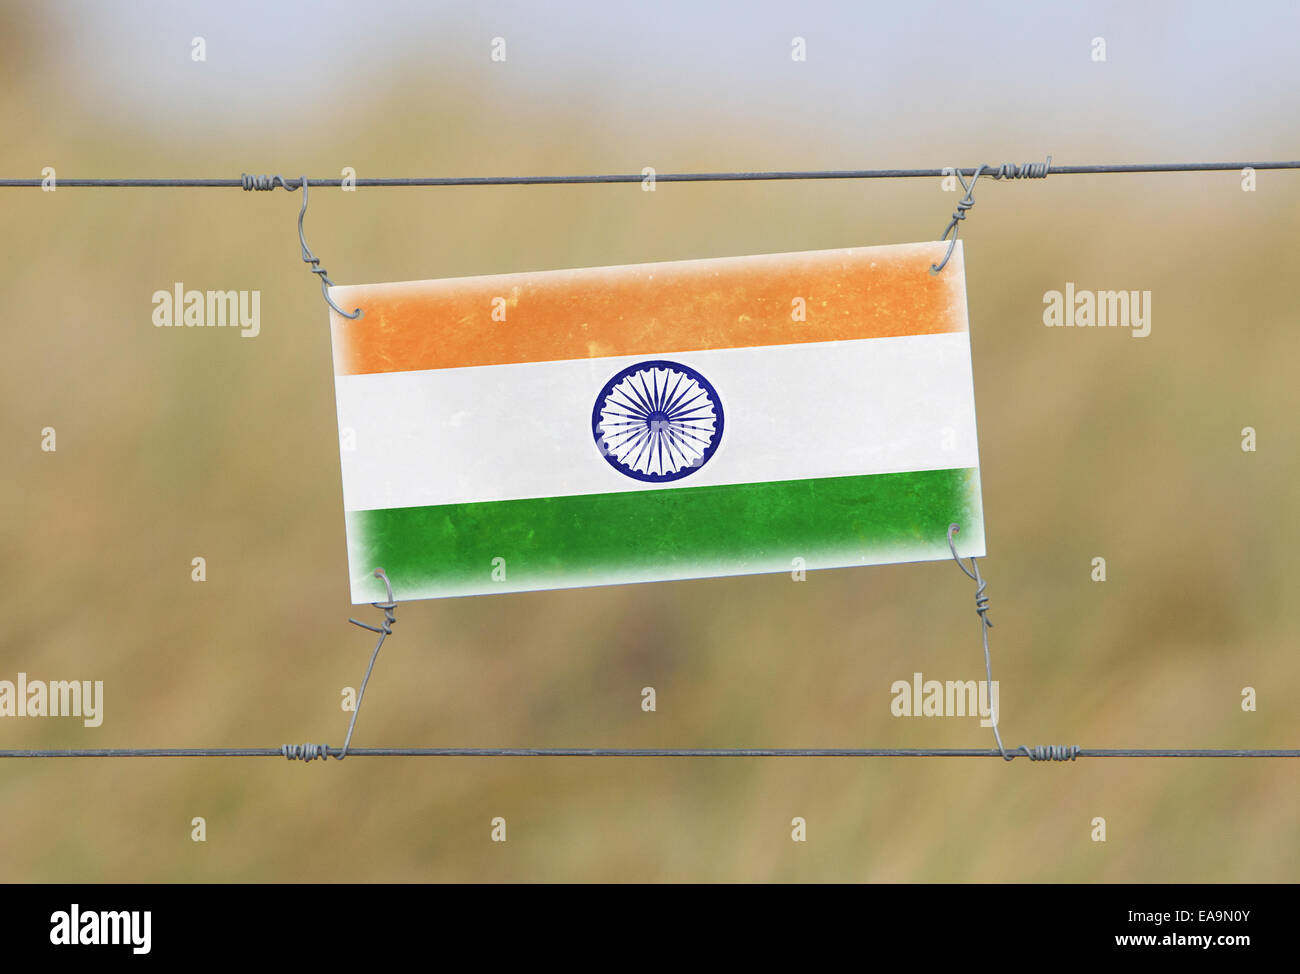 Border fence - Old plastic sign with a flag - India Stock Photo